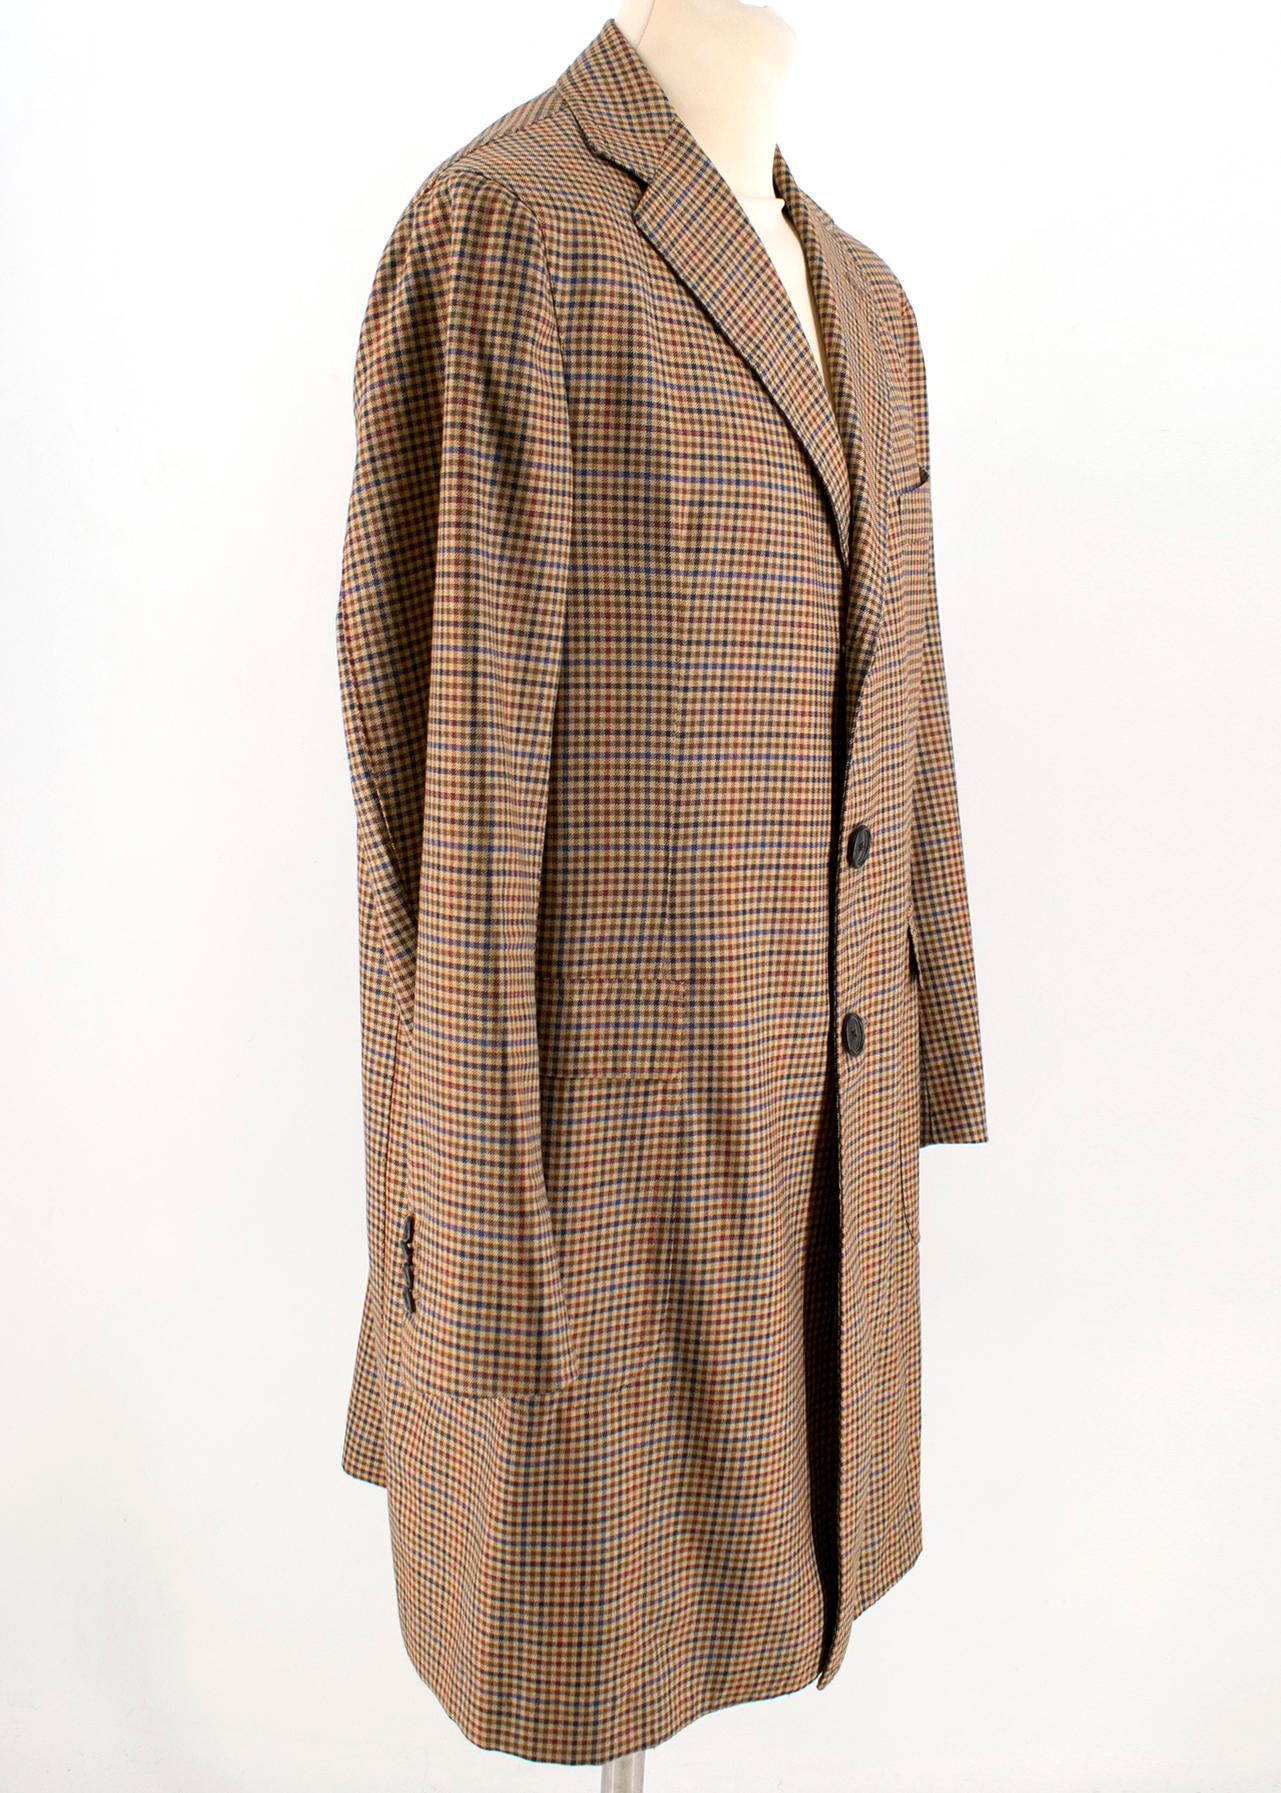 Sartoria Solito Tailored Brown Checked Overcoat

- Tonal-brown, blue and red checked woven coat
- Brown buttons closure and brown button cuff
- One chest pocket
- Single Vent

Please note, these items are pre-owned and may show some signs of